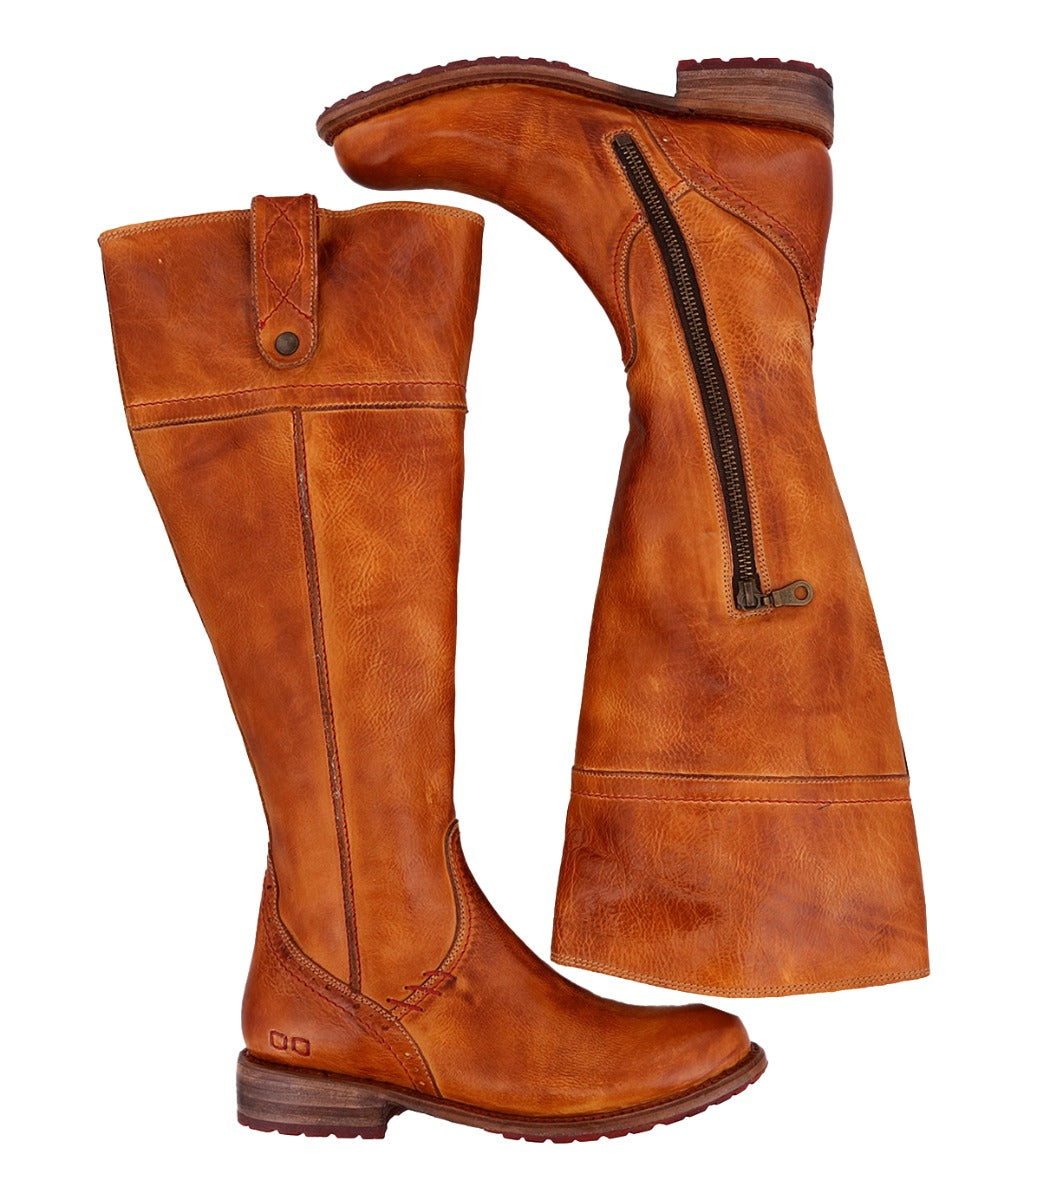 A pair of Bed Stu Jacqueline Wide Calf women's brown riding boots.